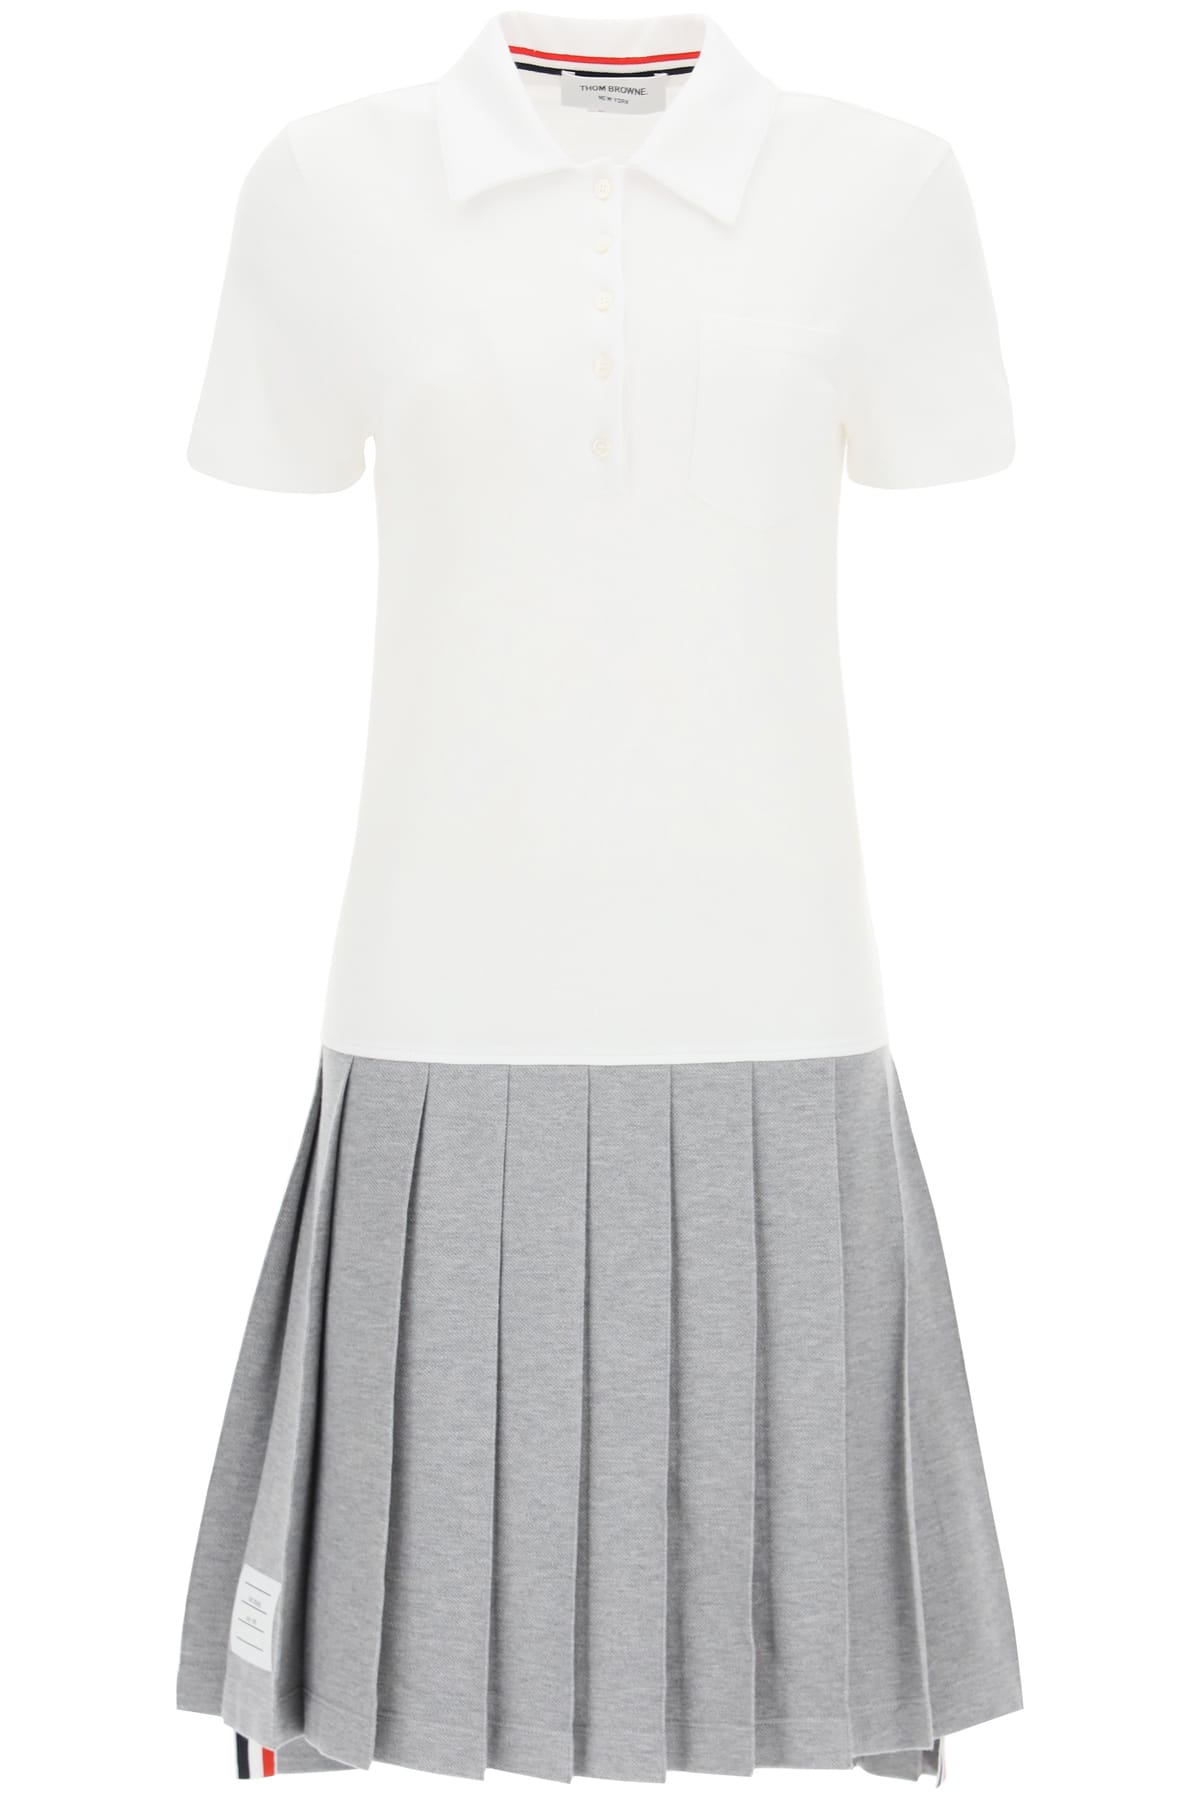 Thom Browne Polo Dress In Cotton Piquet